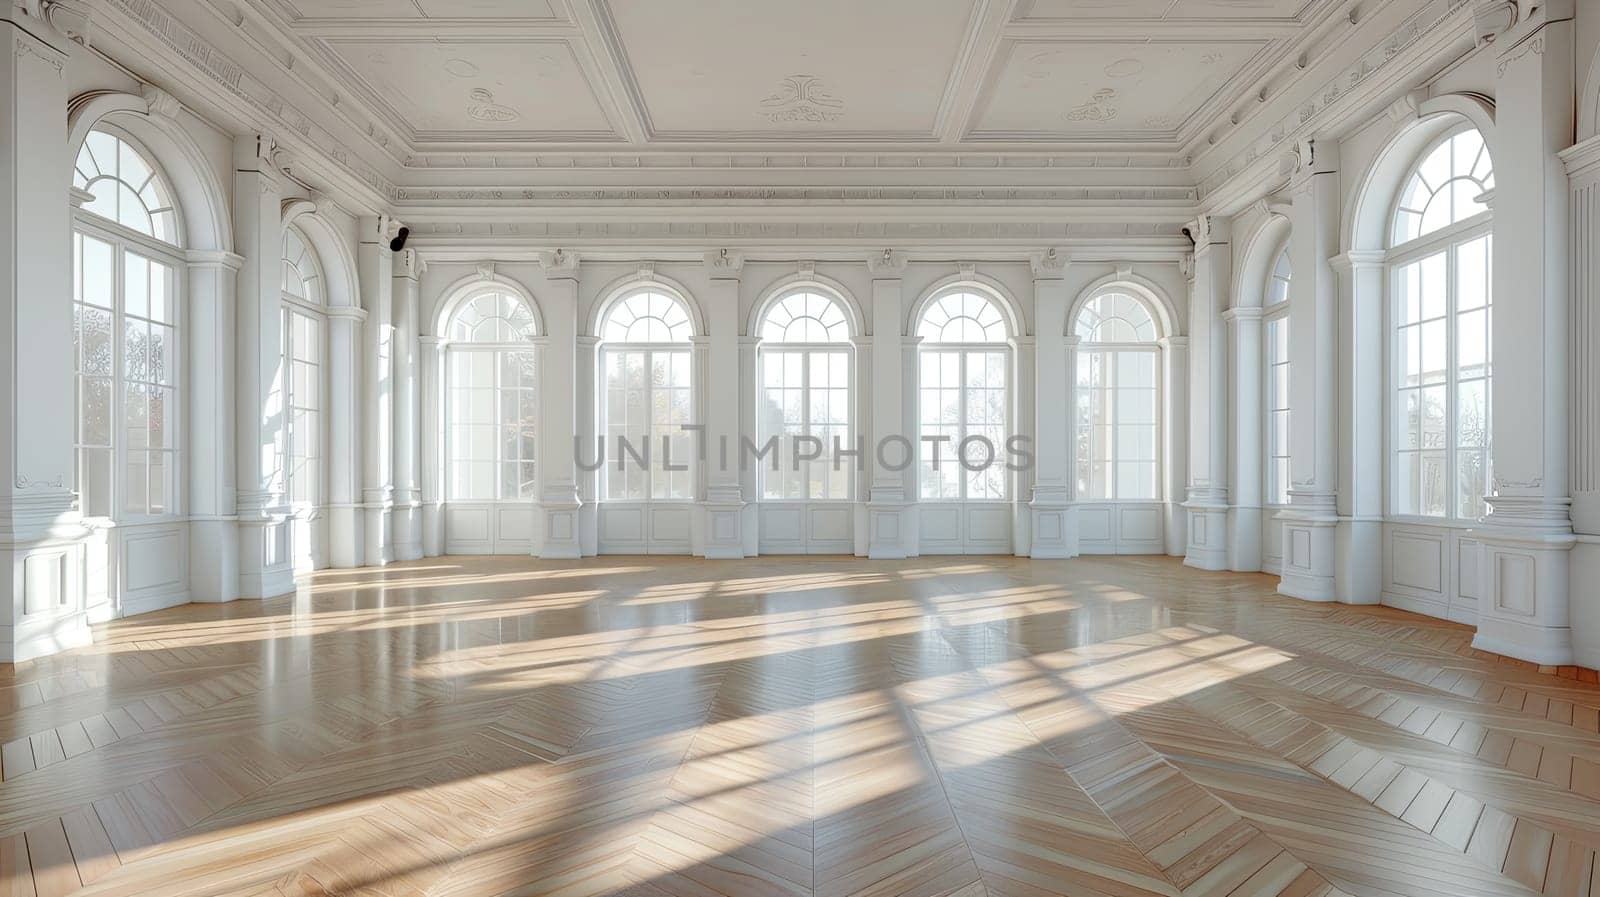 Vintage-style banquet hall with parquet floors and expansive windows.